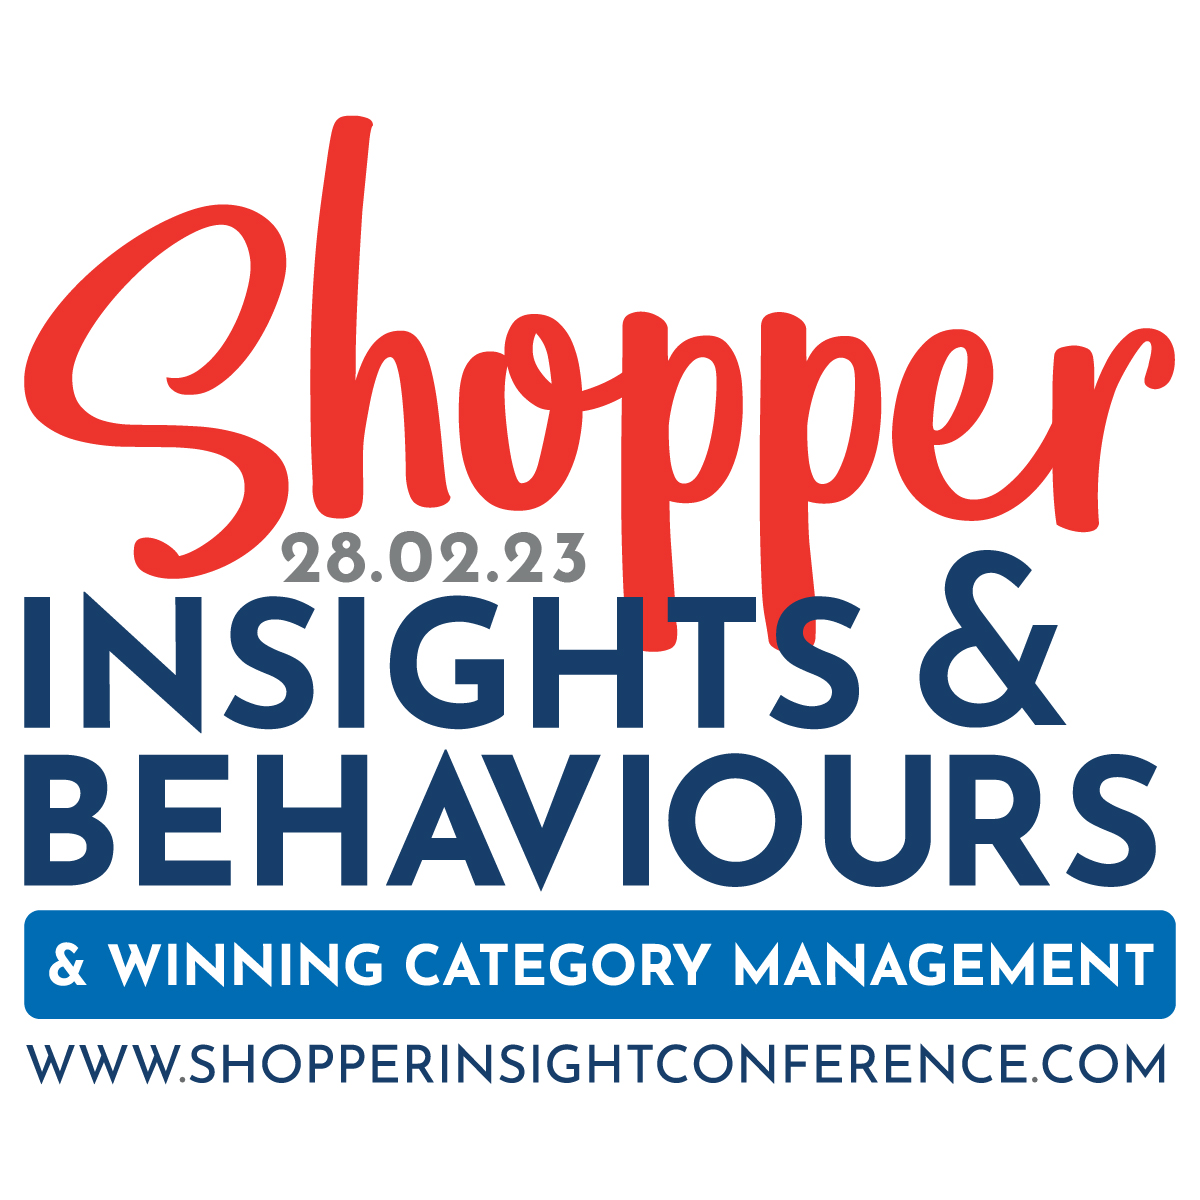 The Shopper Insights and Behaviours Conference